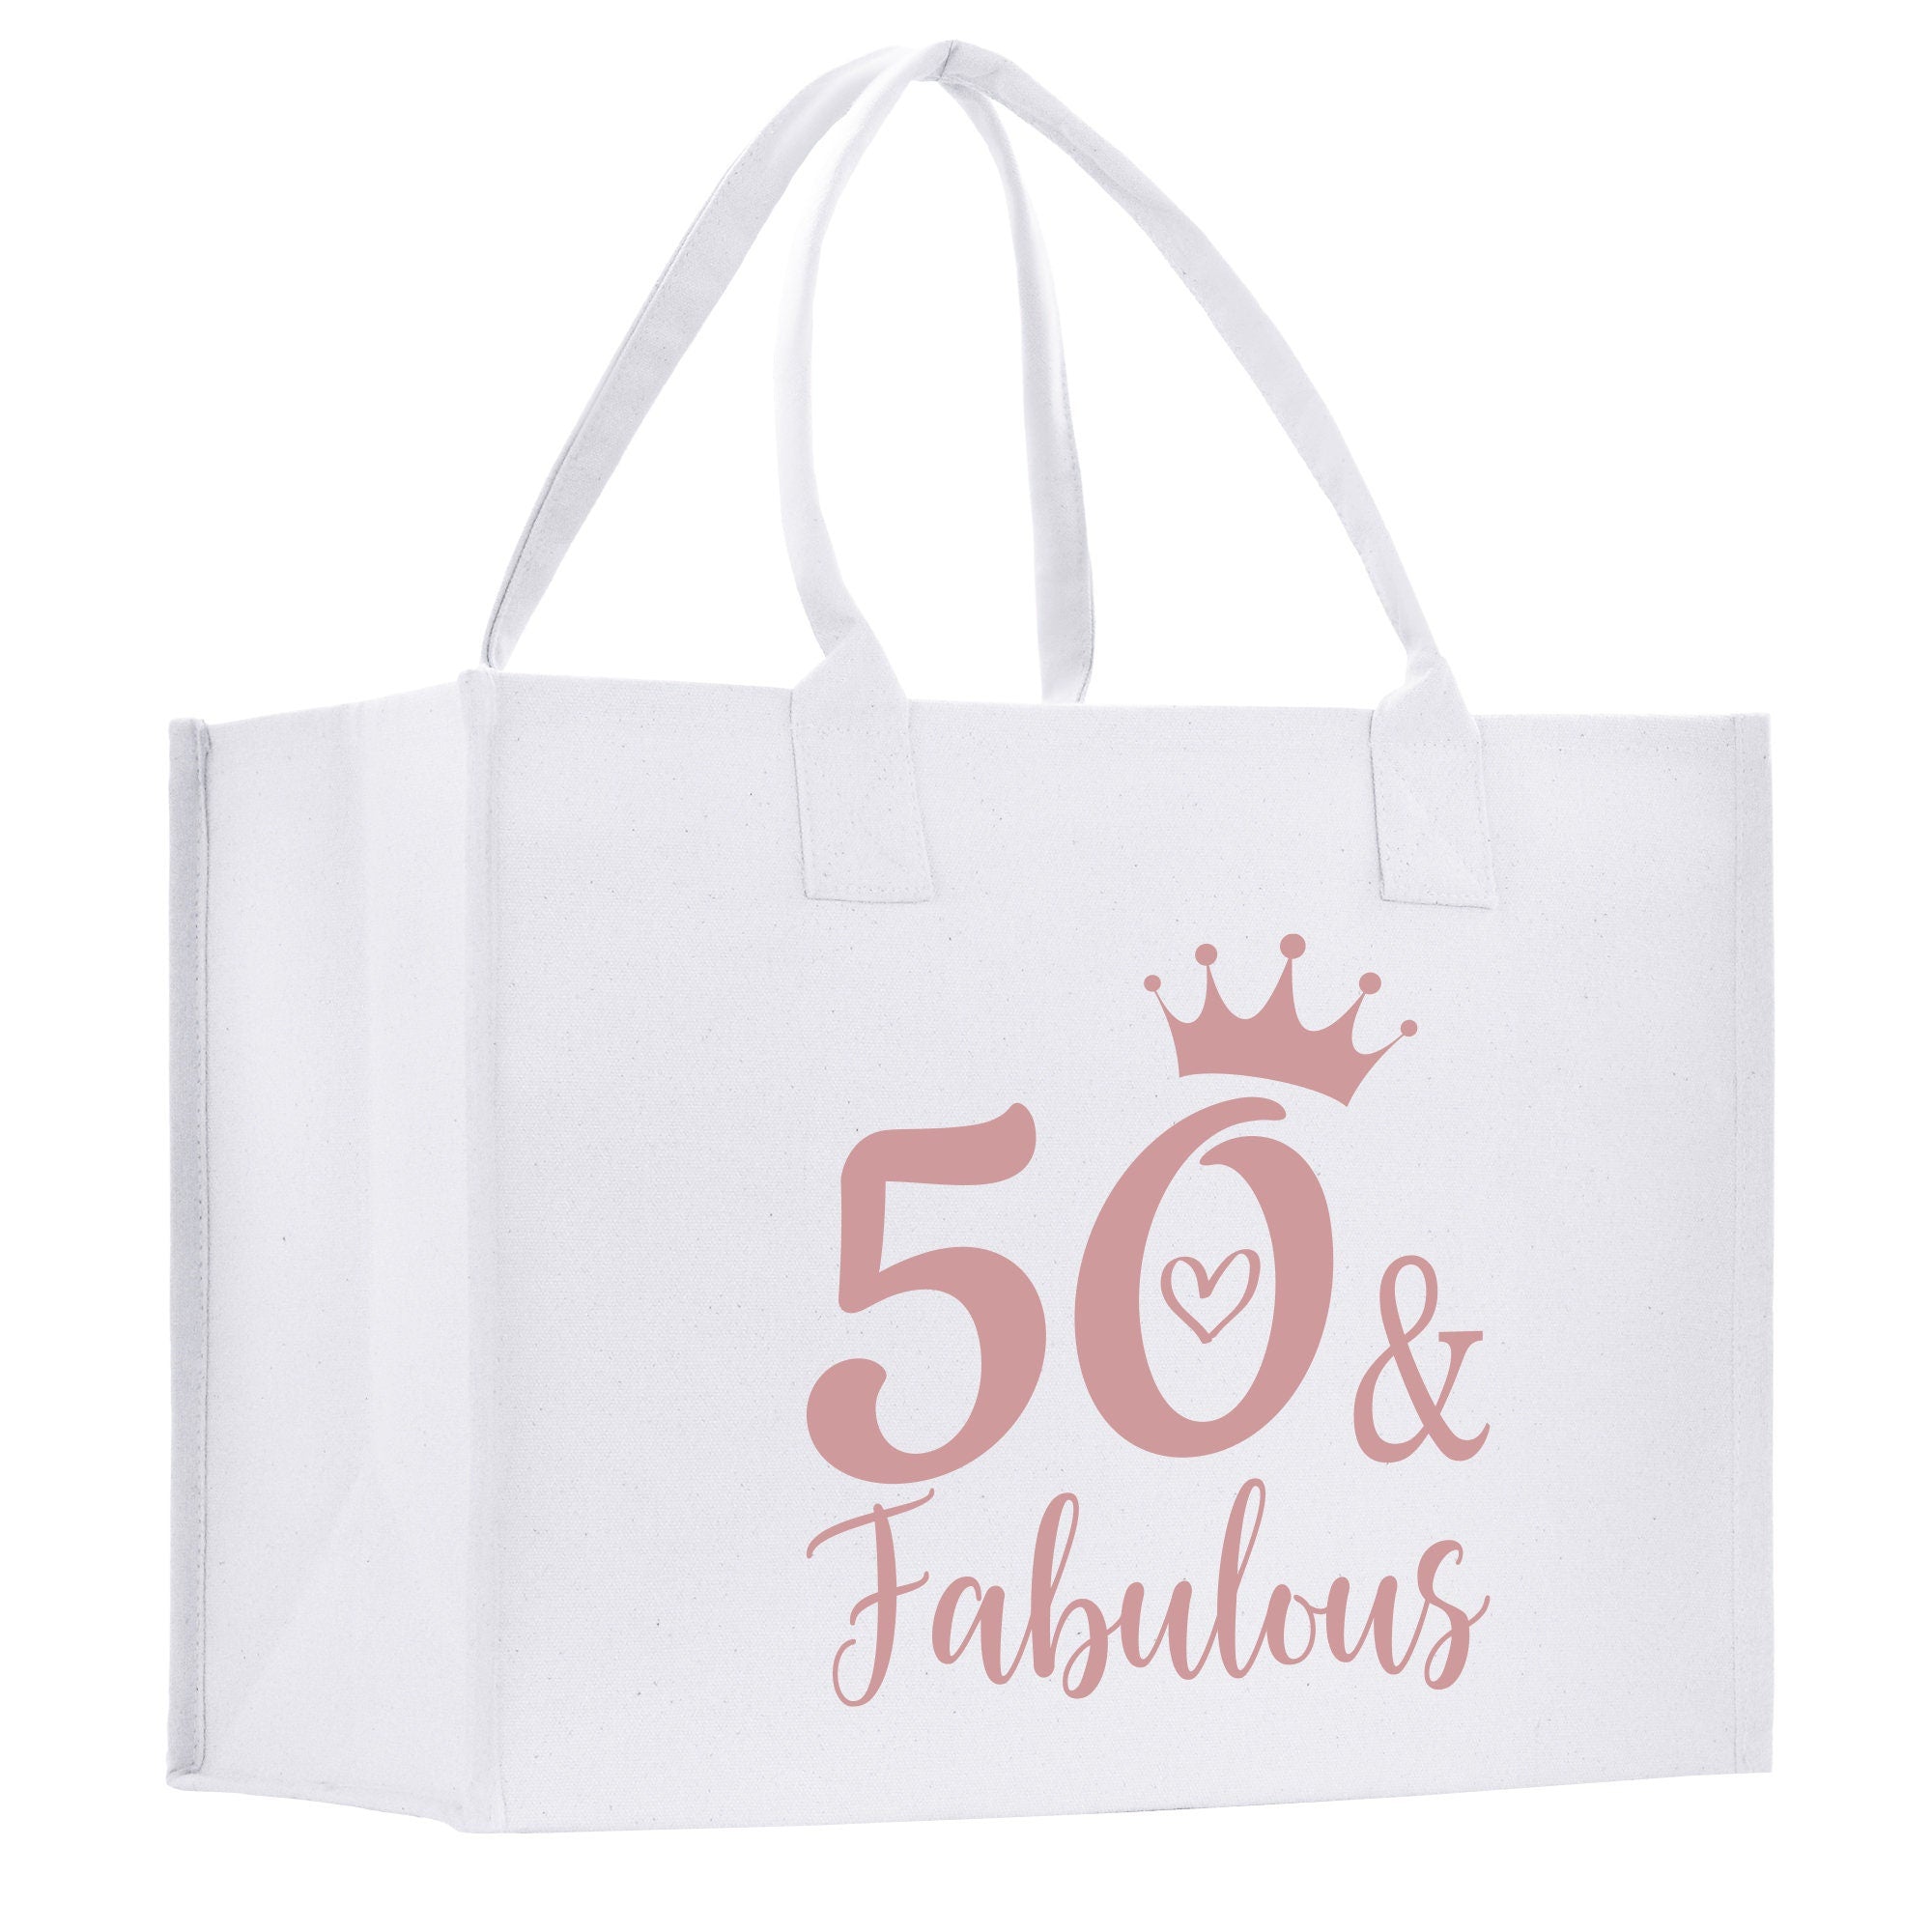 a white shopping bag with the words 50 and fabulous printed on it